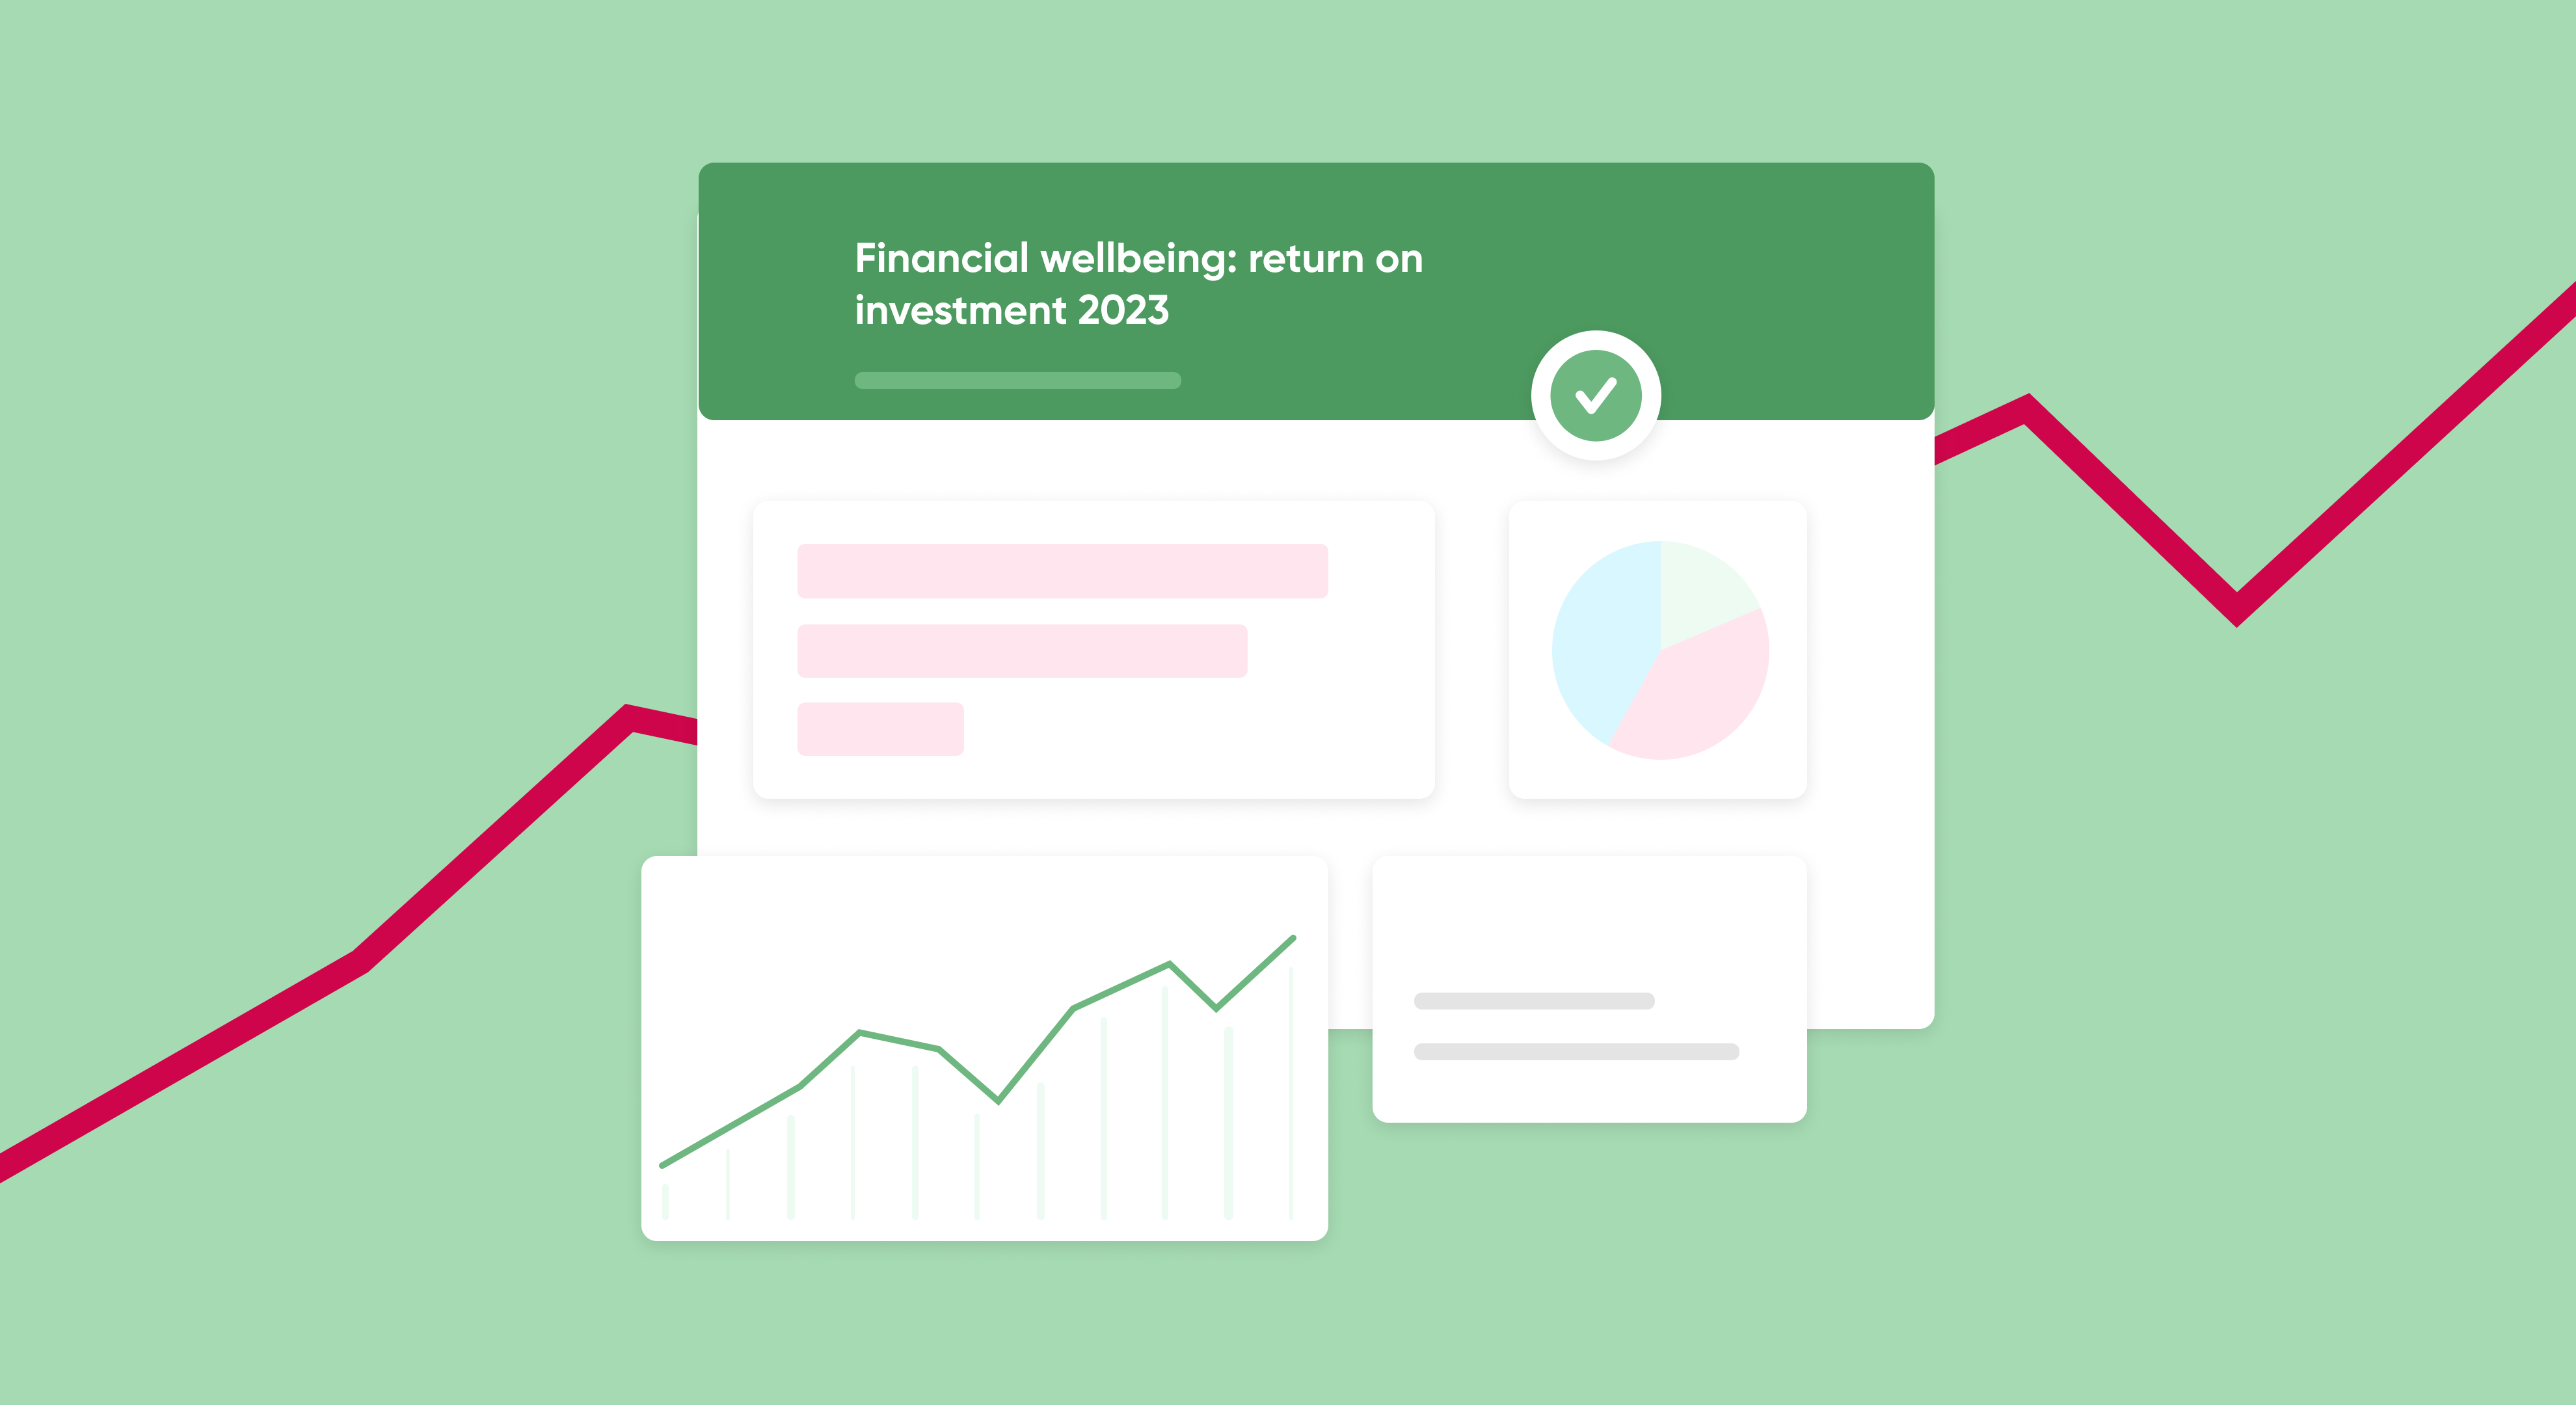 How to measure the ROI of financial wellbeing